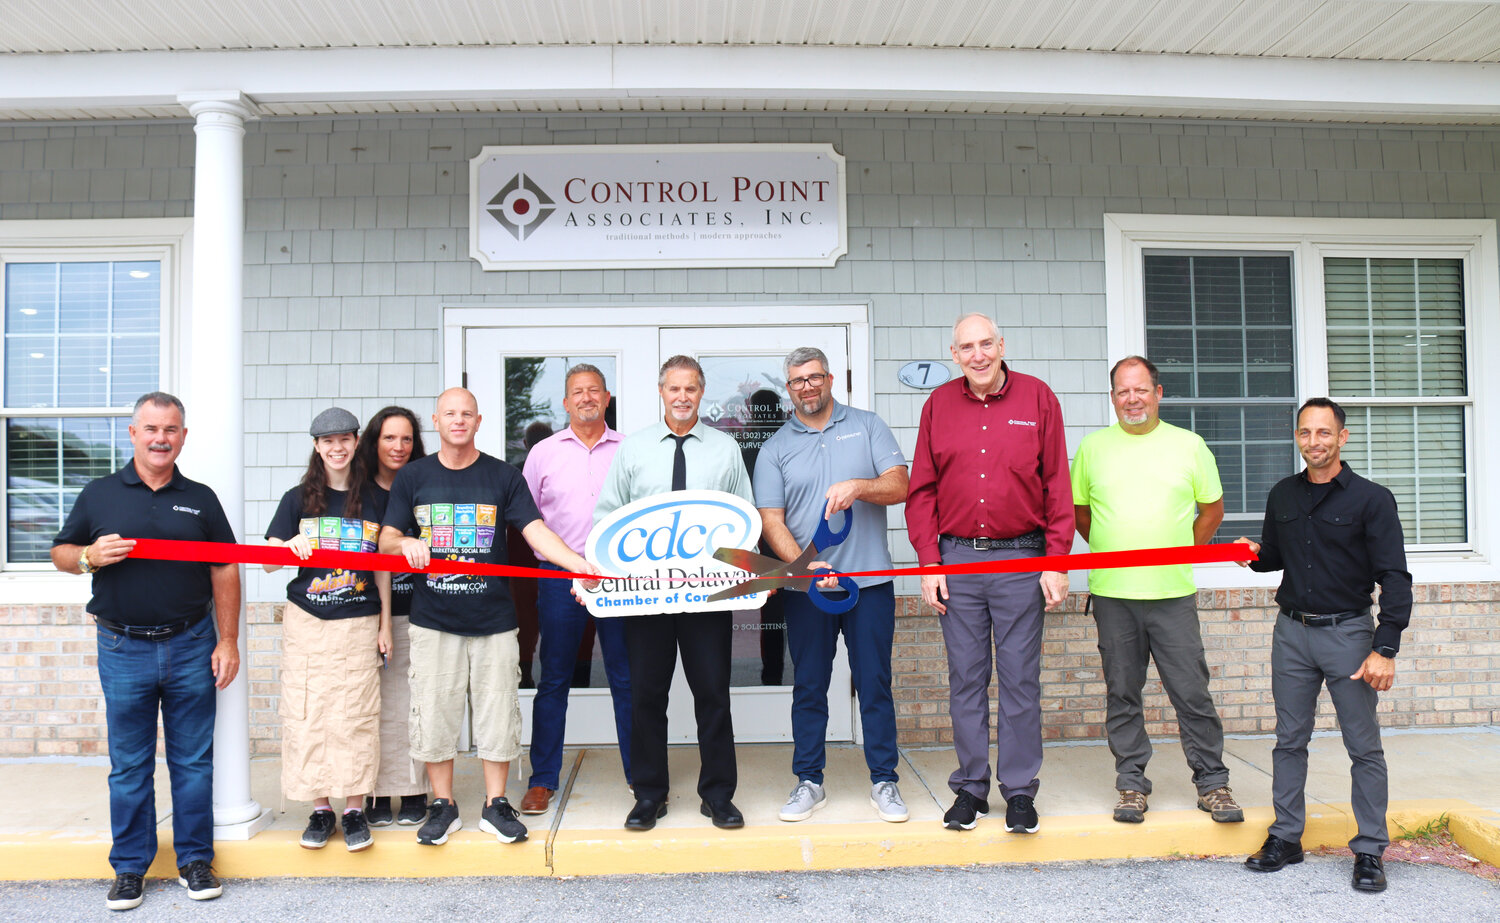 Central Delaware Chamber of Commerce joined Control Point Associates, Inc. Branch Business Development Manager Steven Parent and Marketing Manager Andrew Demarest and their team to celebrate its first anniversary.